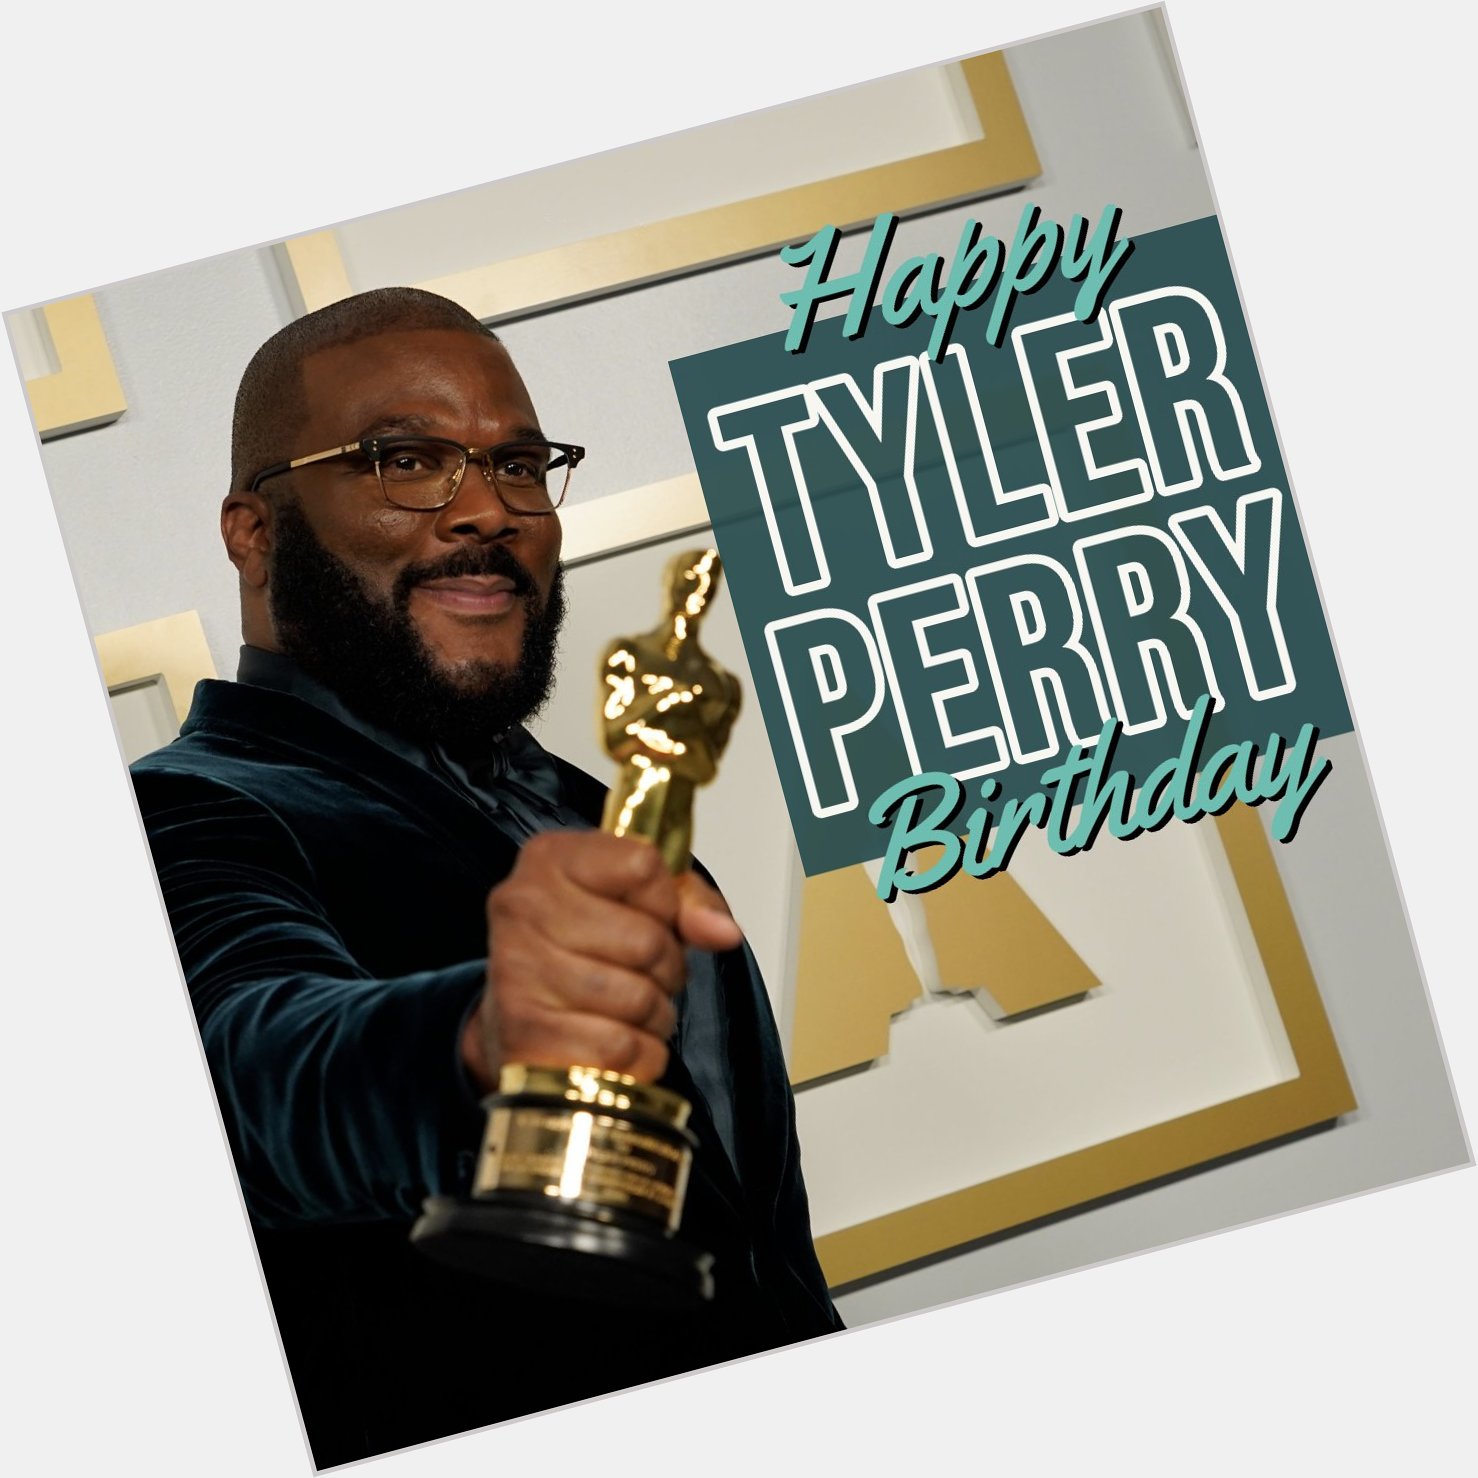 Happy 52nd birthday to Tyler Perry! 